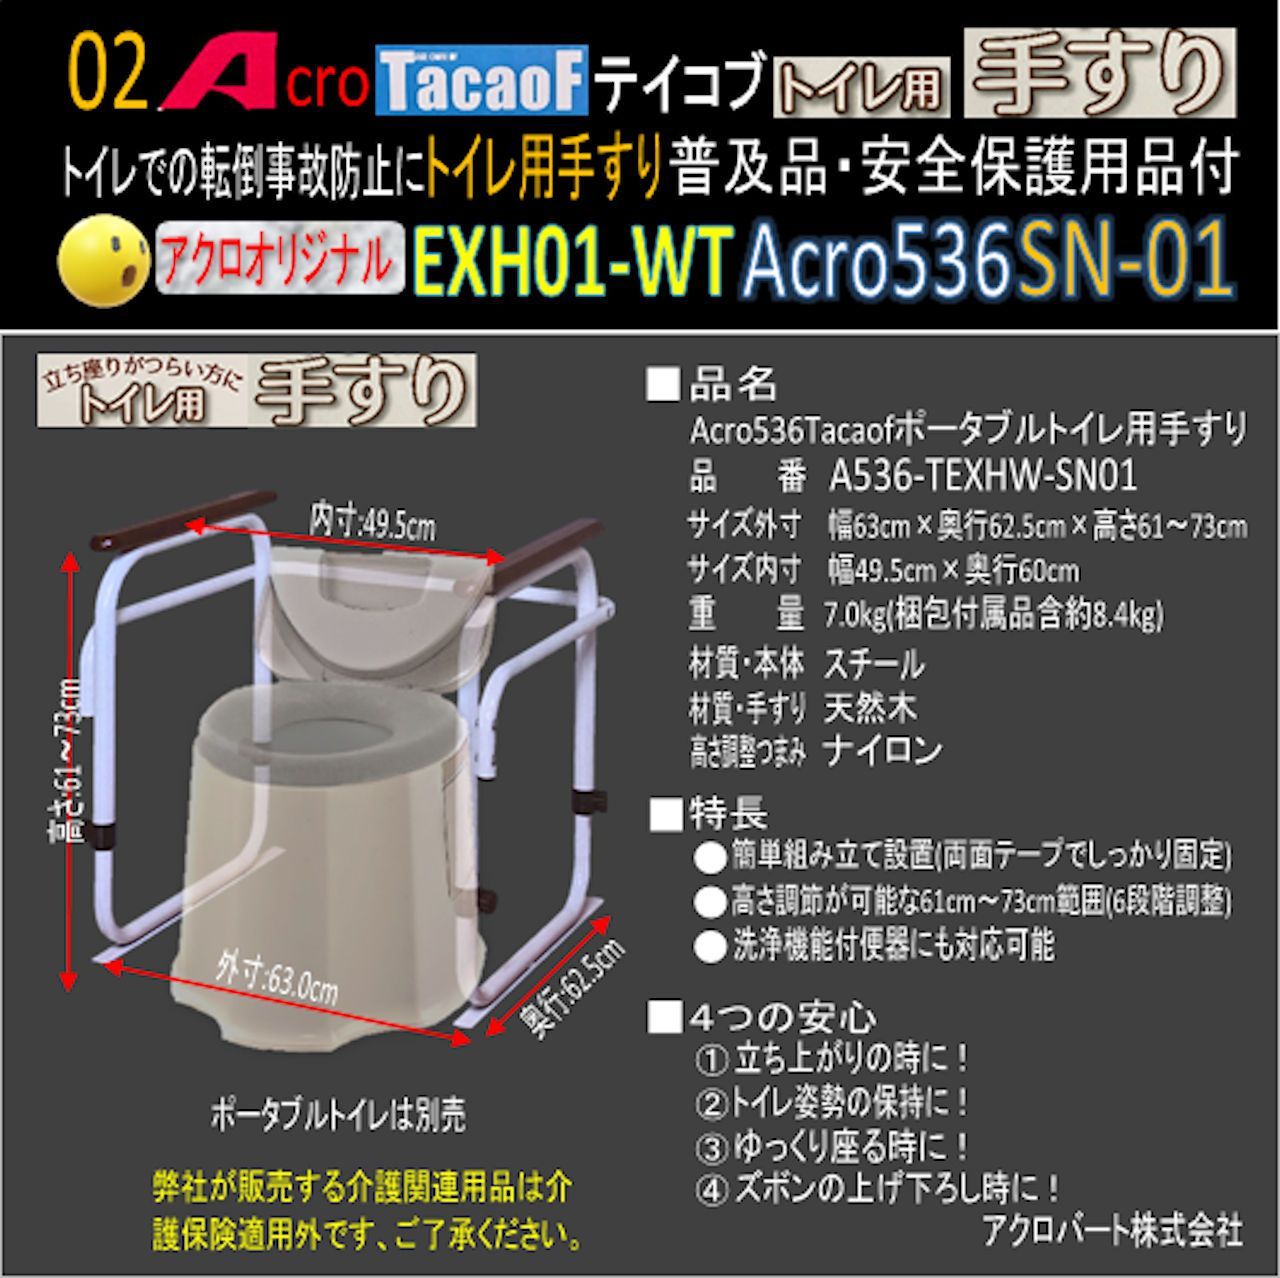 Acro536Tacaofポータブルトイレ用手すり安全保護用品付-SN01 - アクロ